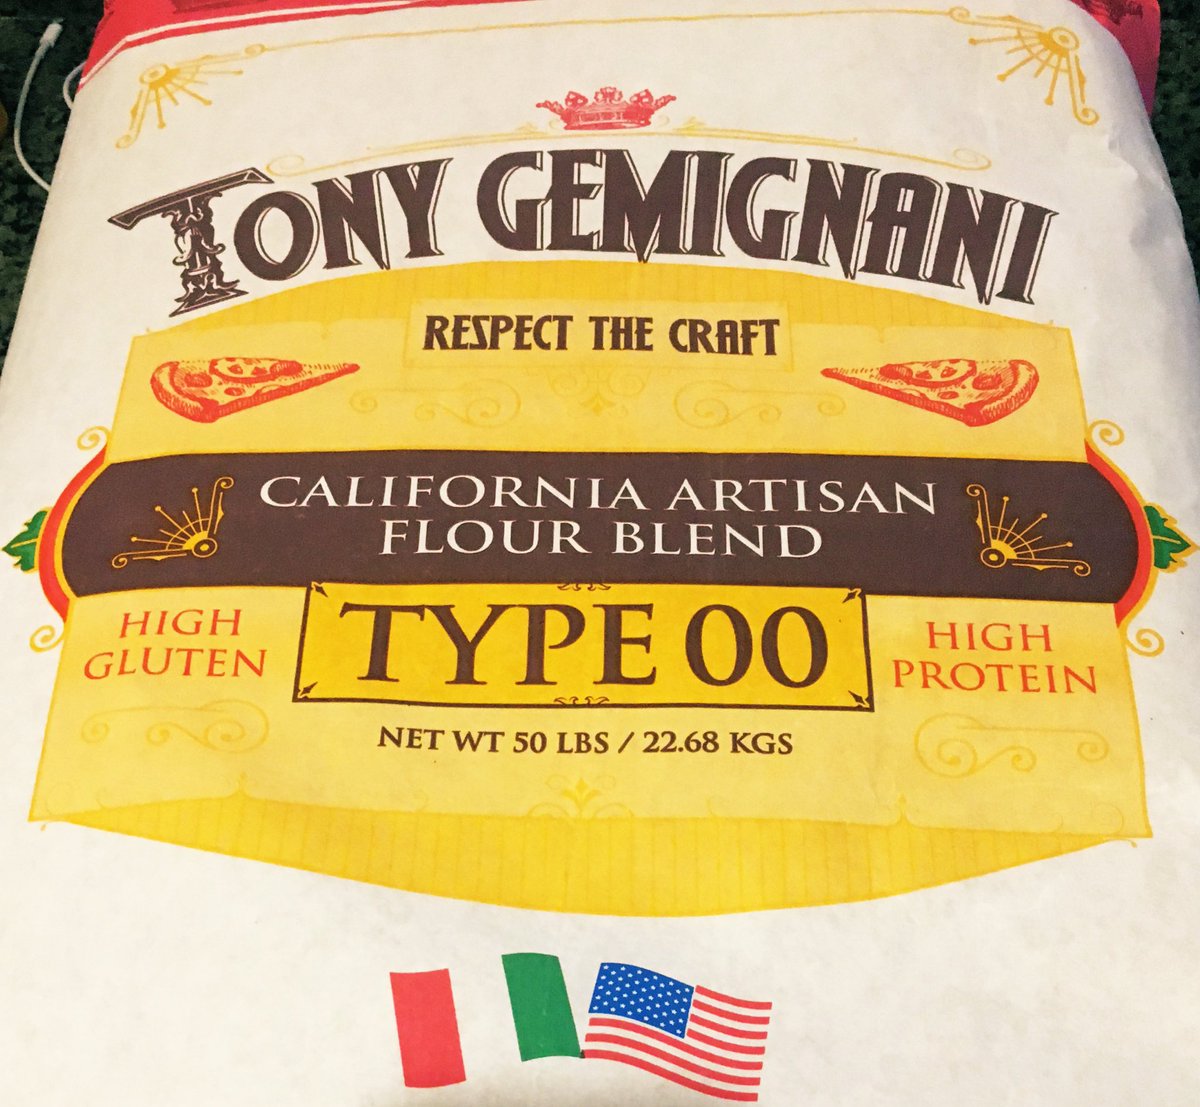 Excited to try out the @CentralMilling @tonyspizza415 California Artisan Flour Blend that was just delivered. May have to fire up the oven this weekend